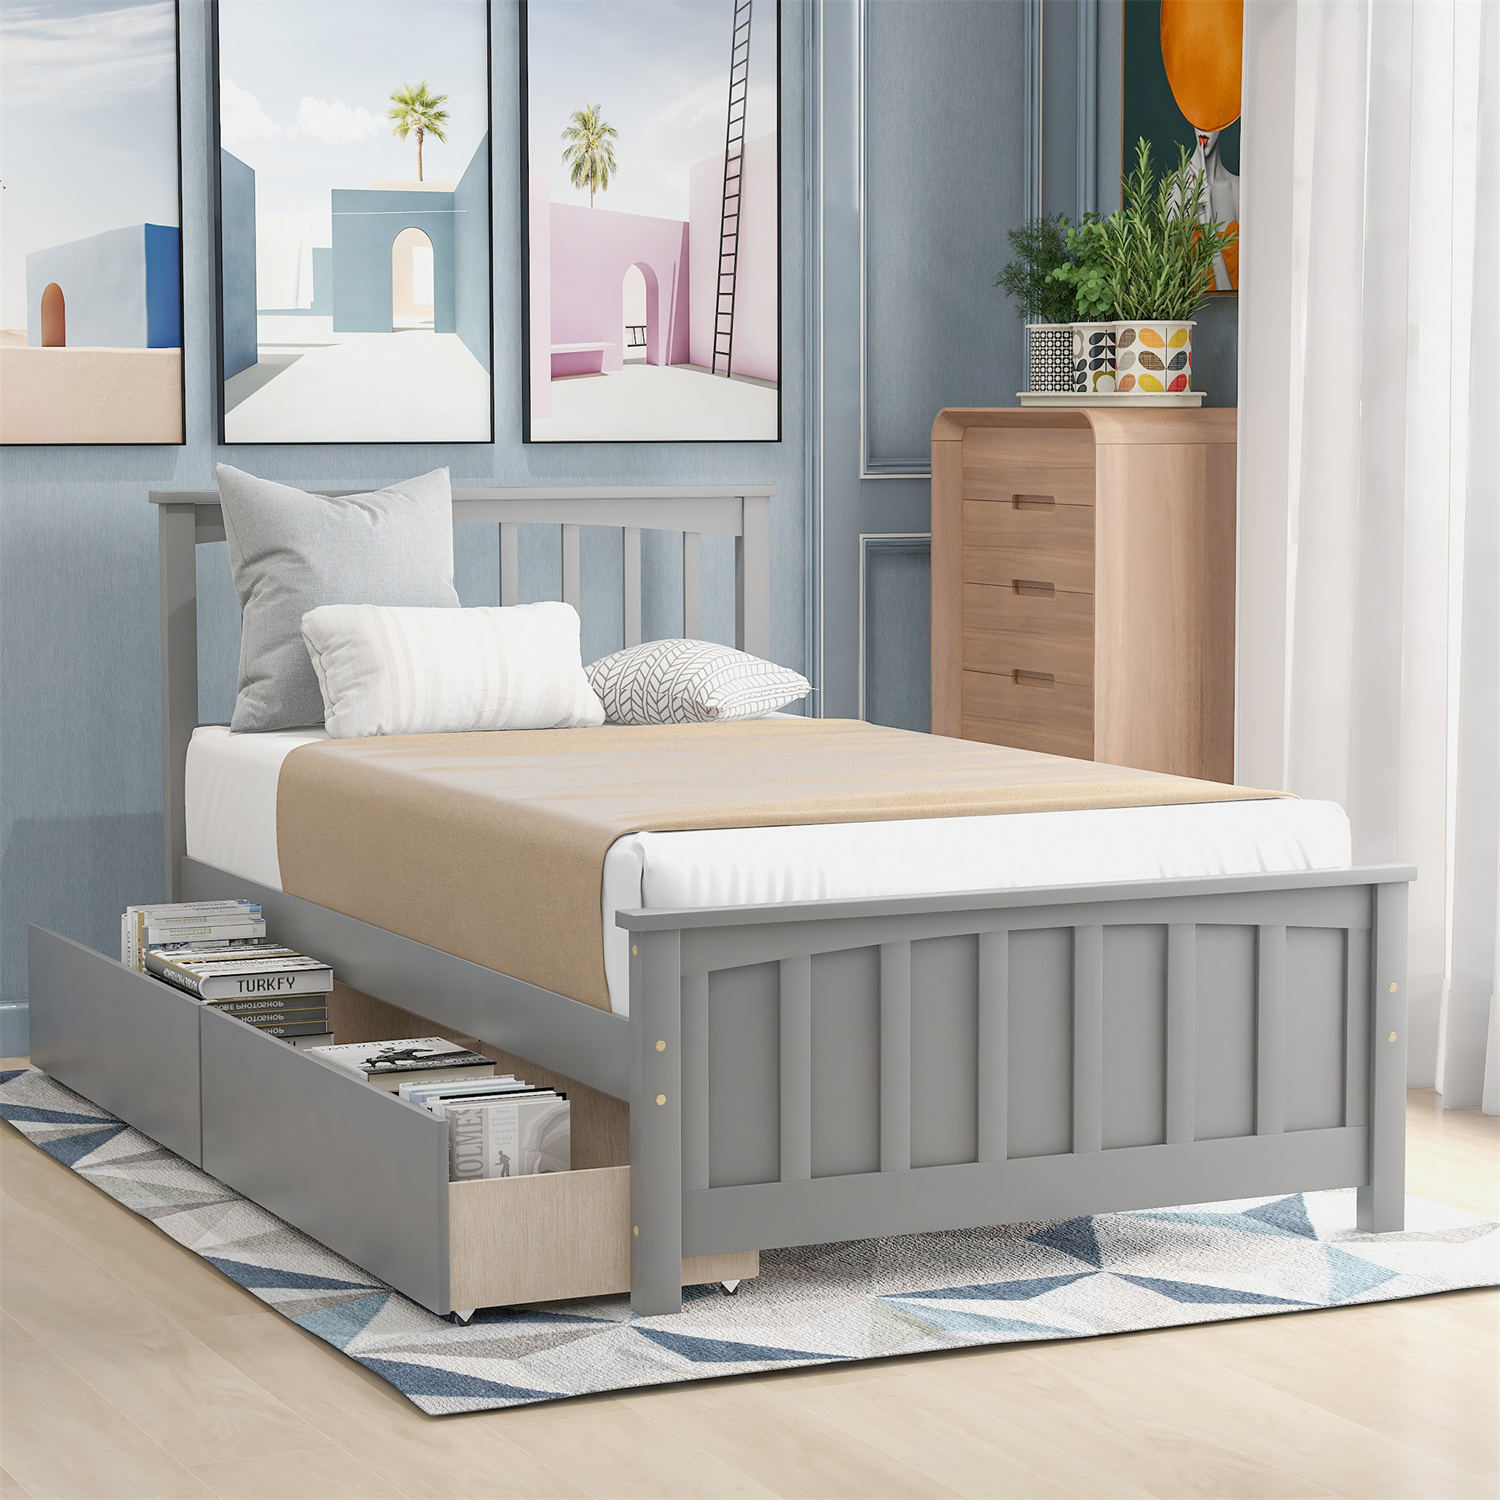 Twin Size Platform Bed with 2 Drawers, Classic Solid Wood Bed Frame with Headboard and Under-Bed Storage Space, for Kids Teens Adults Bedroom Furniture, No Box Spring Need, Grey - image 1 of 6